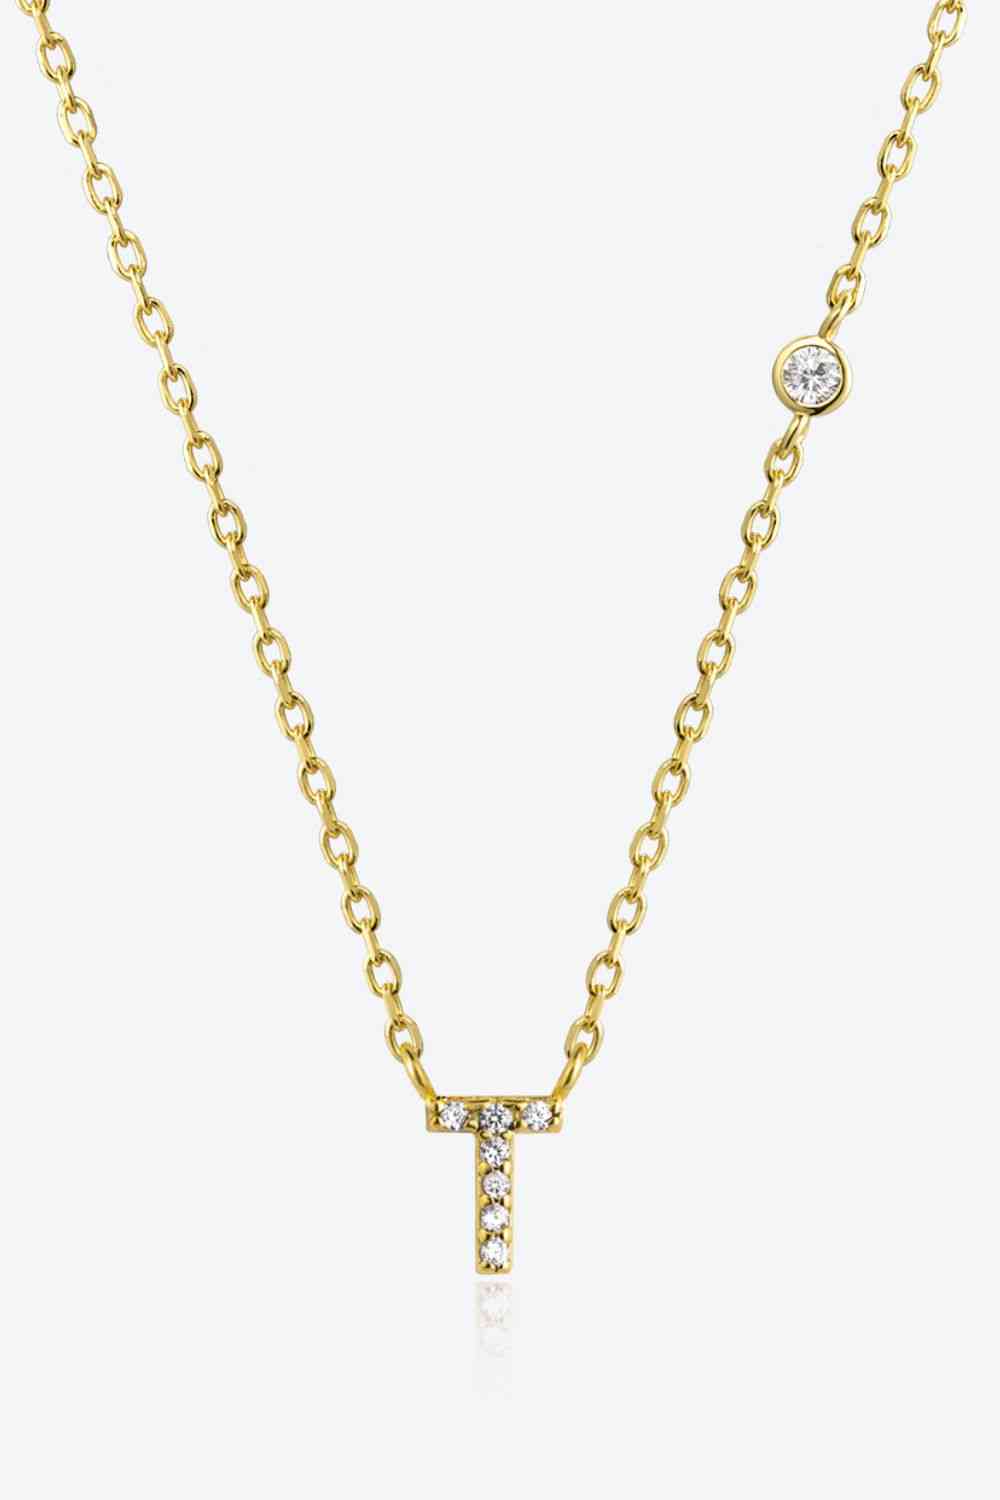 White Zircon Studded Initial Pendant Necklace Q to U